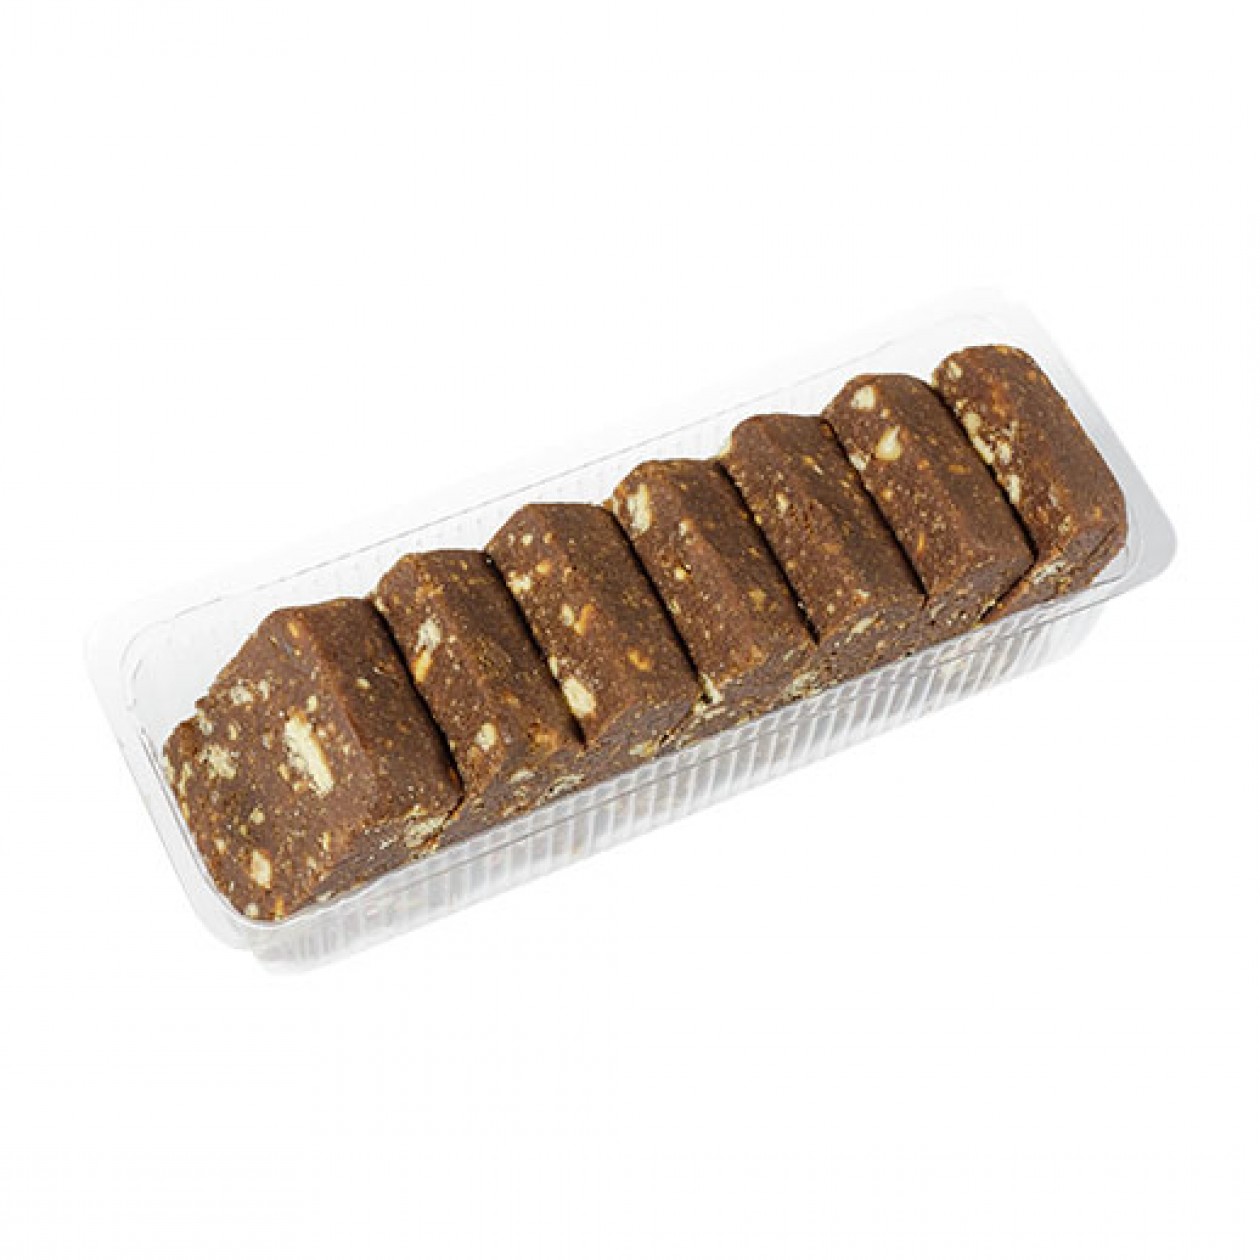 Accasa Cake Biscuit Salami with Turkish Delight and Raisins 300g